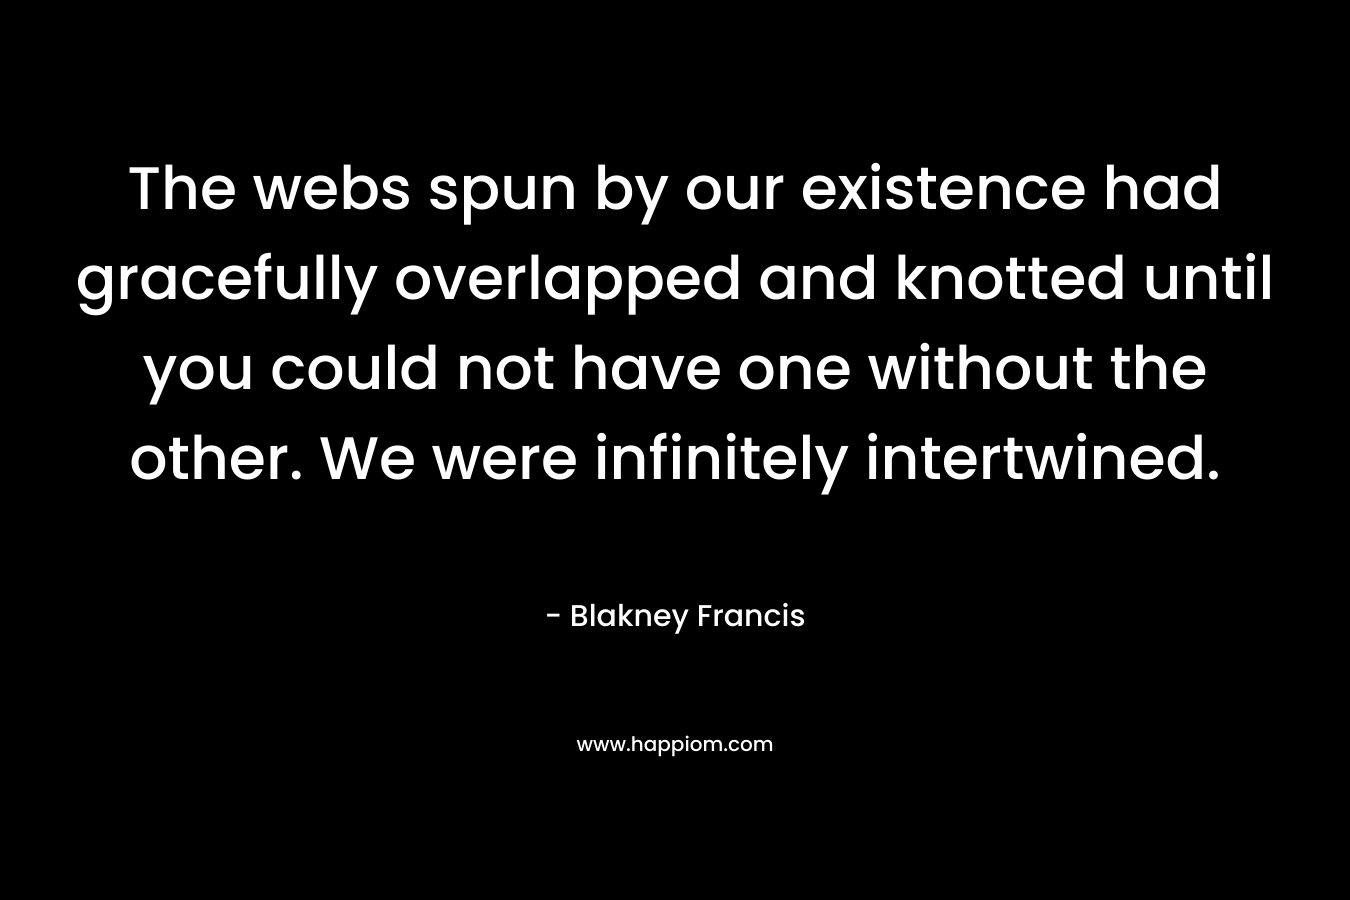 The webs spun by our existence had gracefully overlapped and knotted until you could not have one without the other. We were infinitely intertwined.